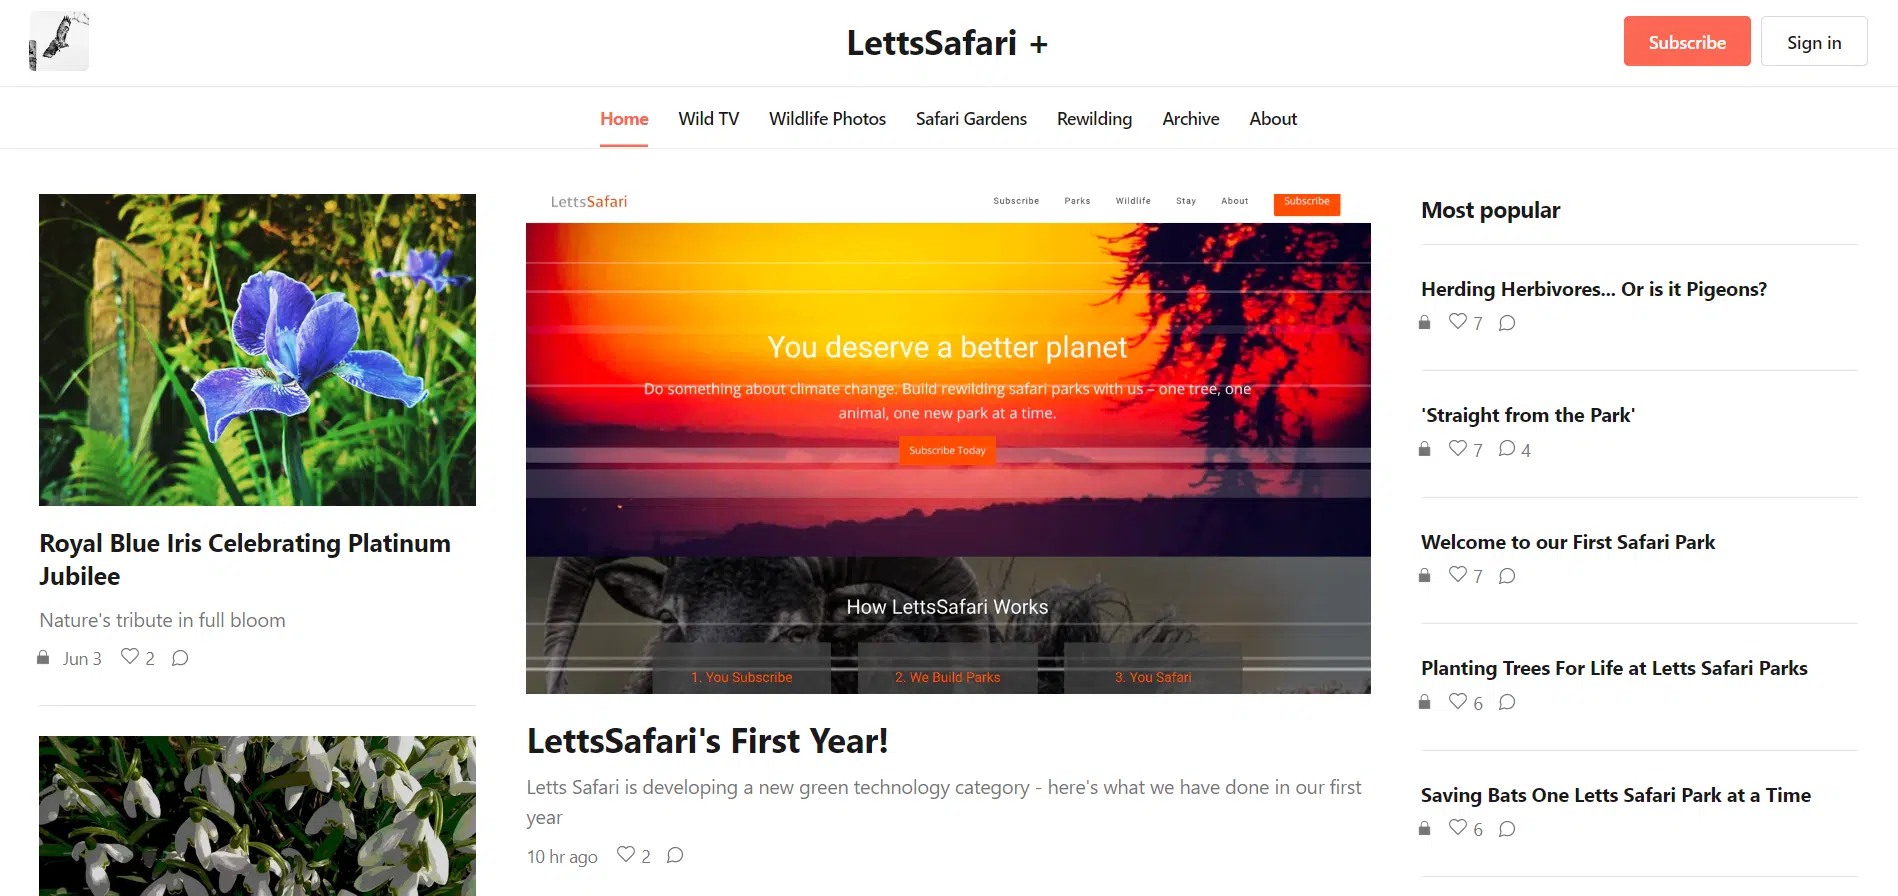 LettsSafari+ homepage, with multiple articles including 